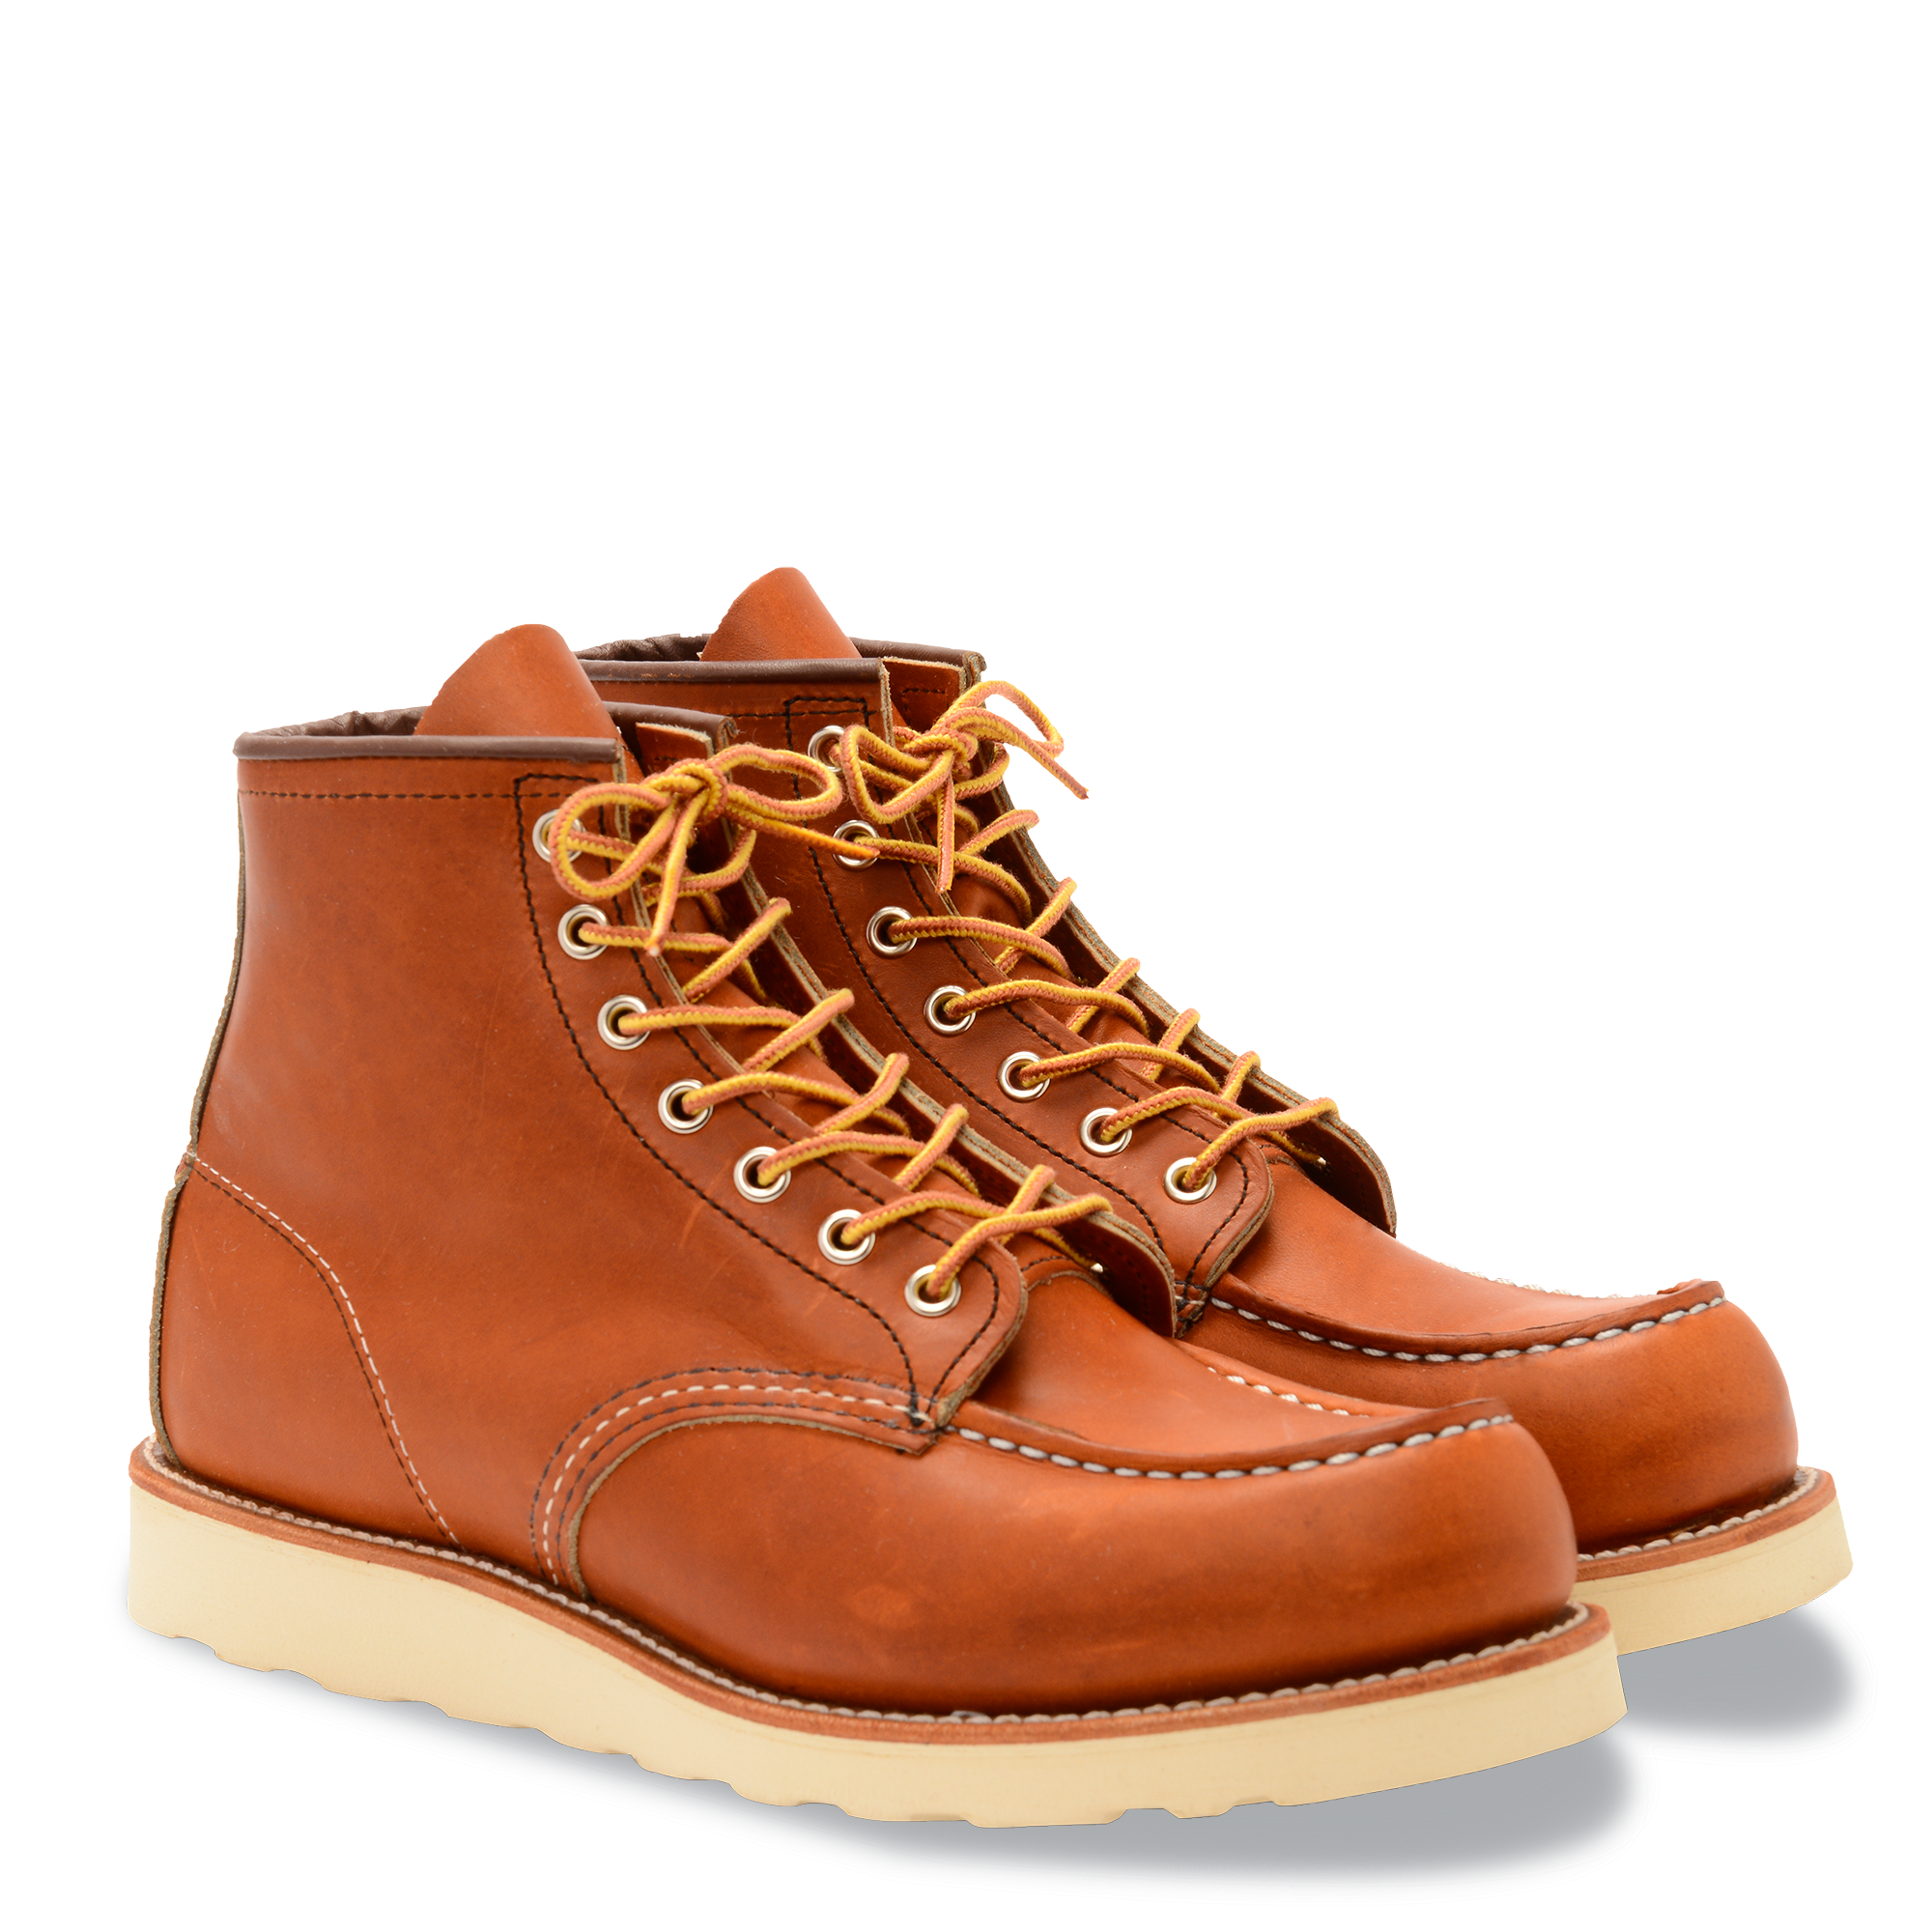 Carry regenval regisseur Red Wing Roughneck Moc Toe Work Boots 8146 - Red Wing London